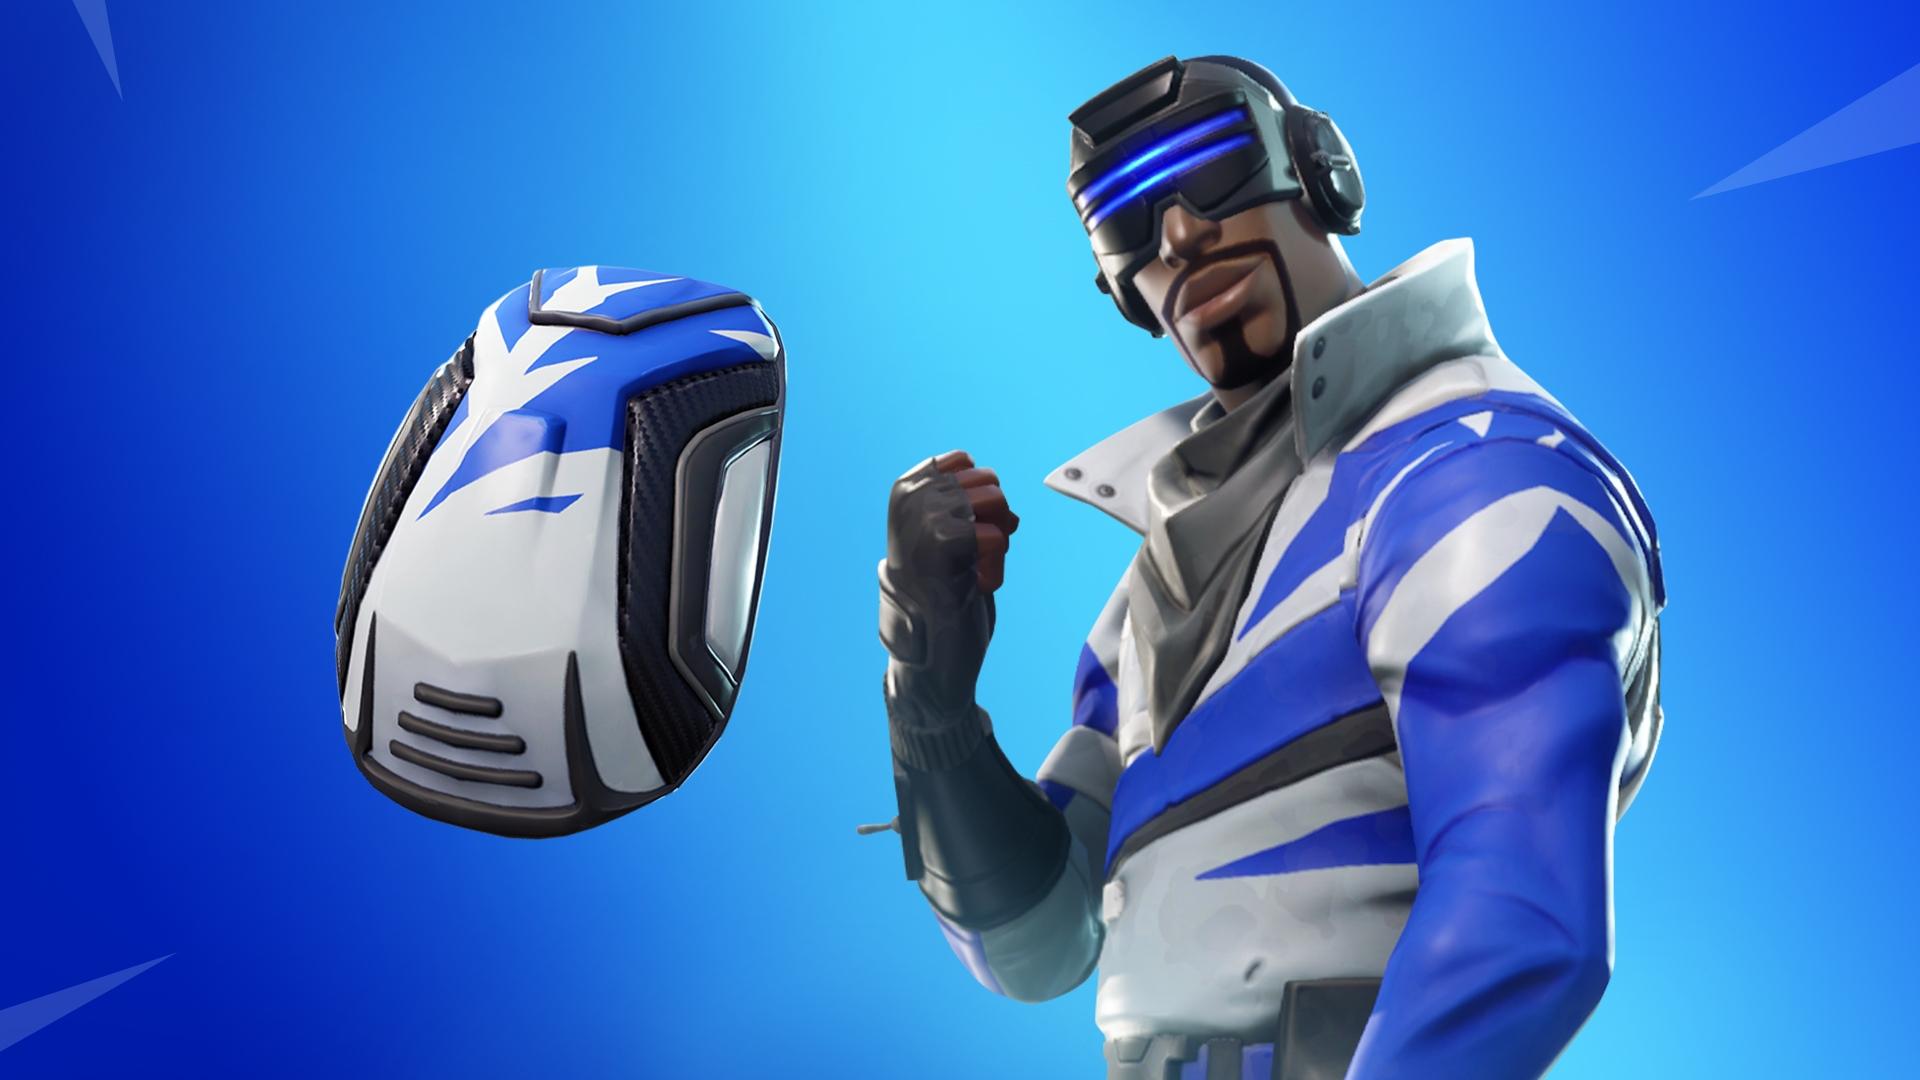 Fortnite Blue Logo - Here's How To Get The New Free PS Plus 'Fortnite' Loot Exclusively ...